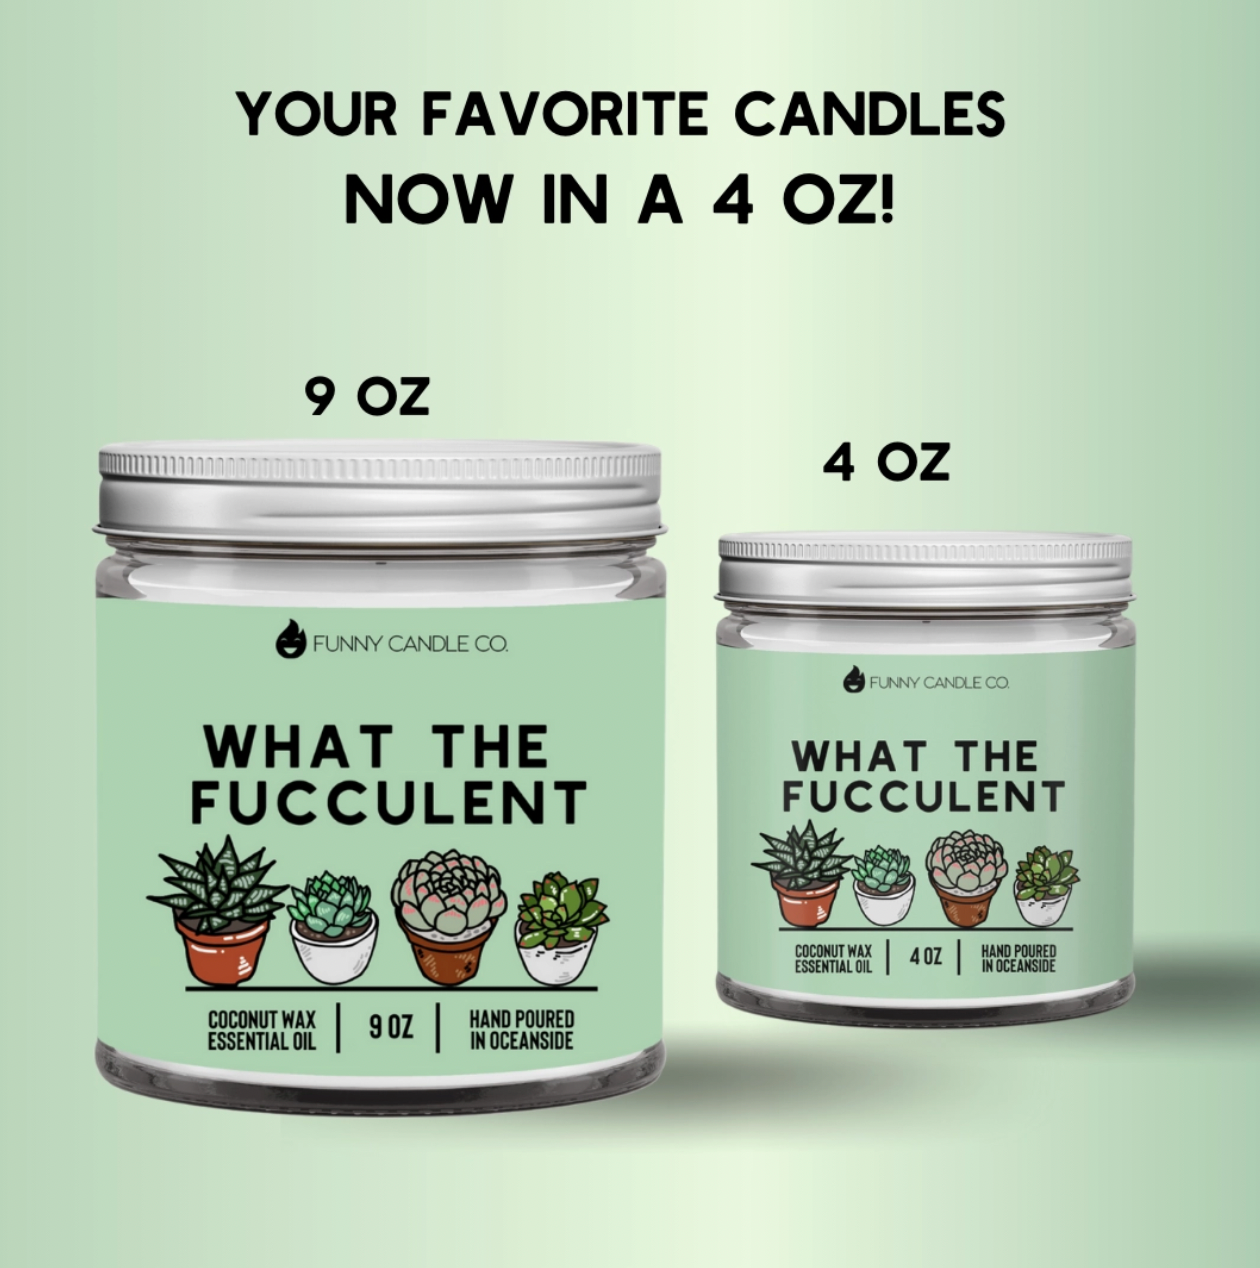 "What the Fucculent" Candle 9 oz.